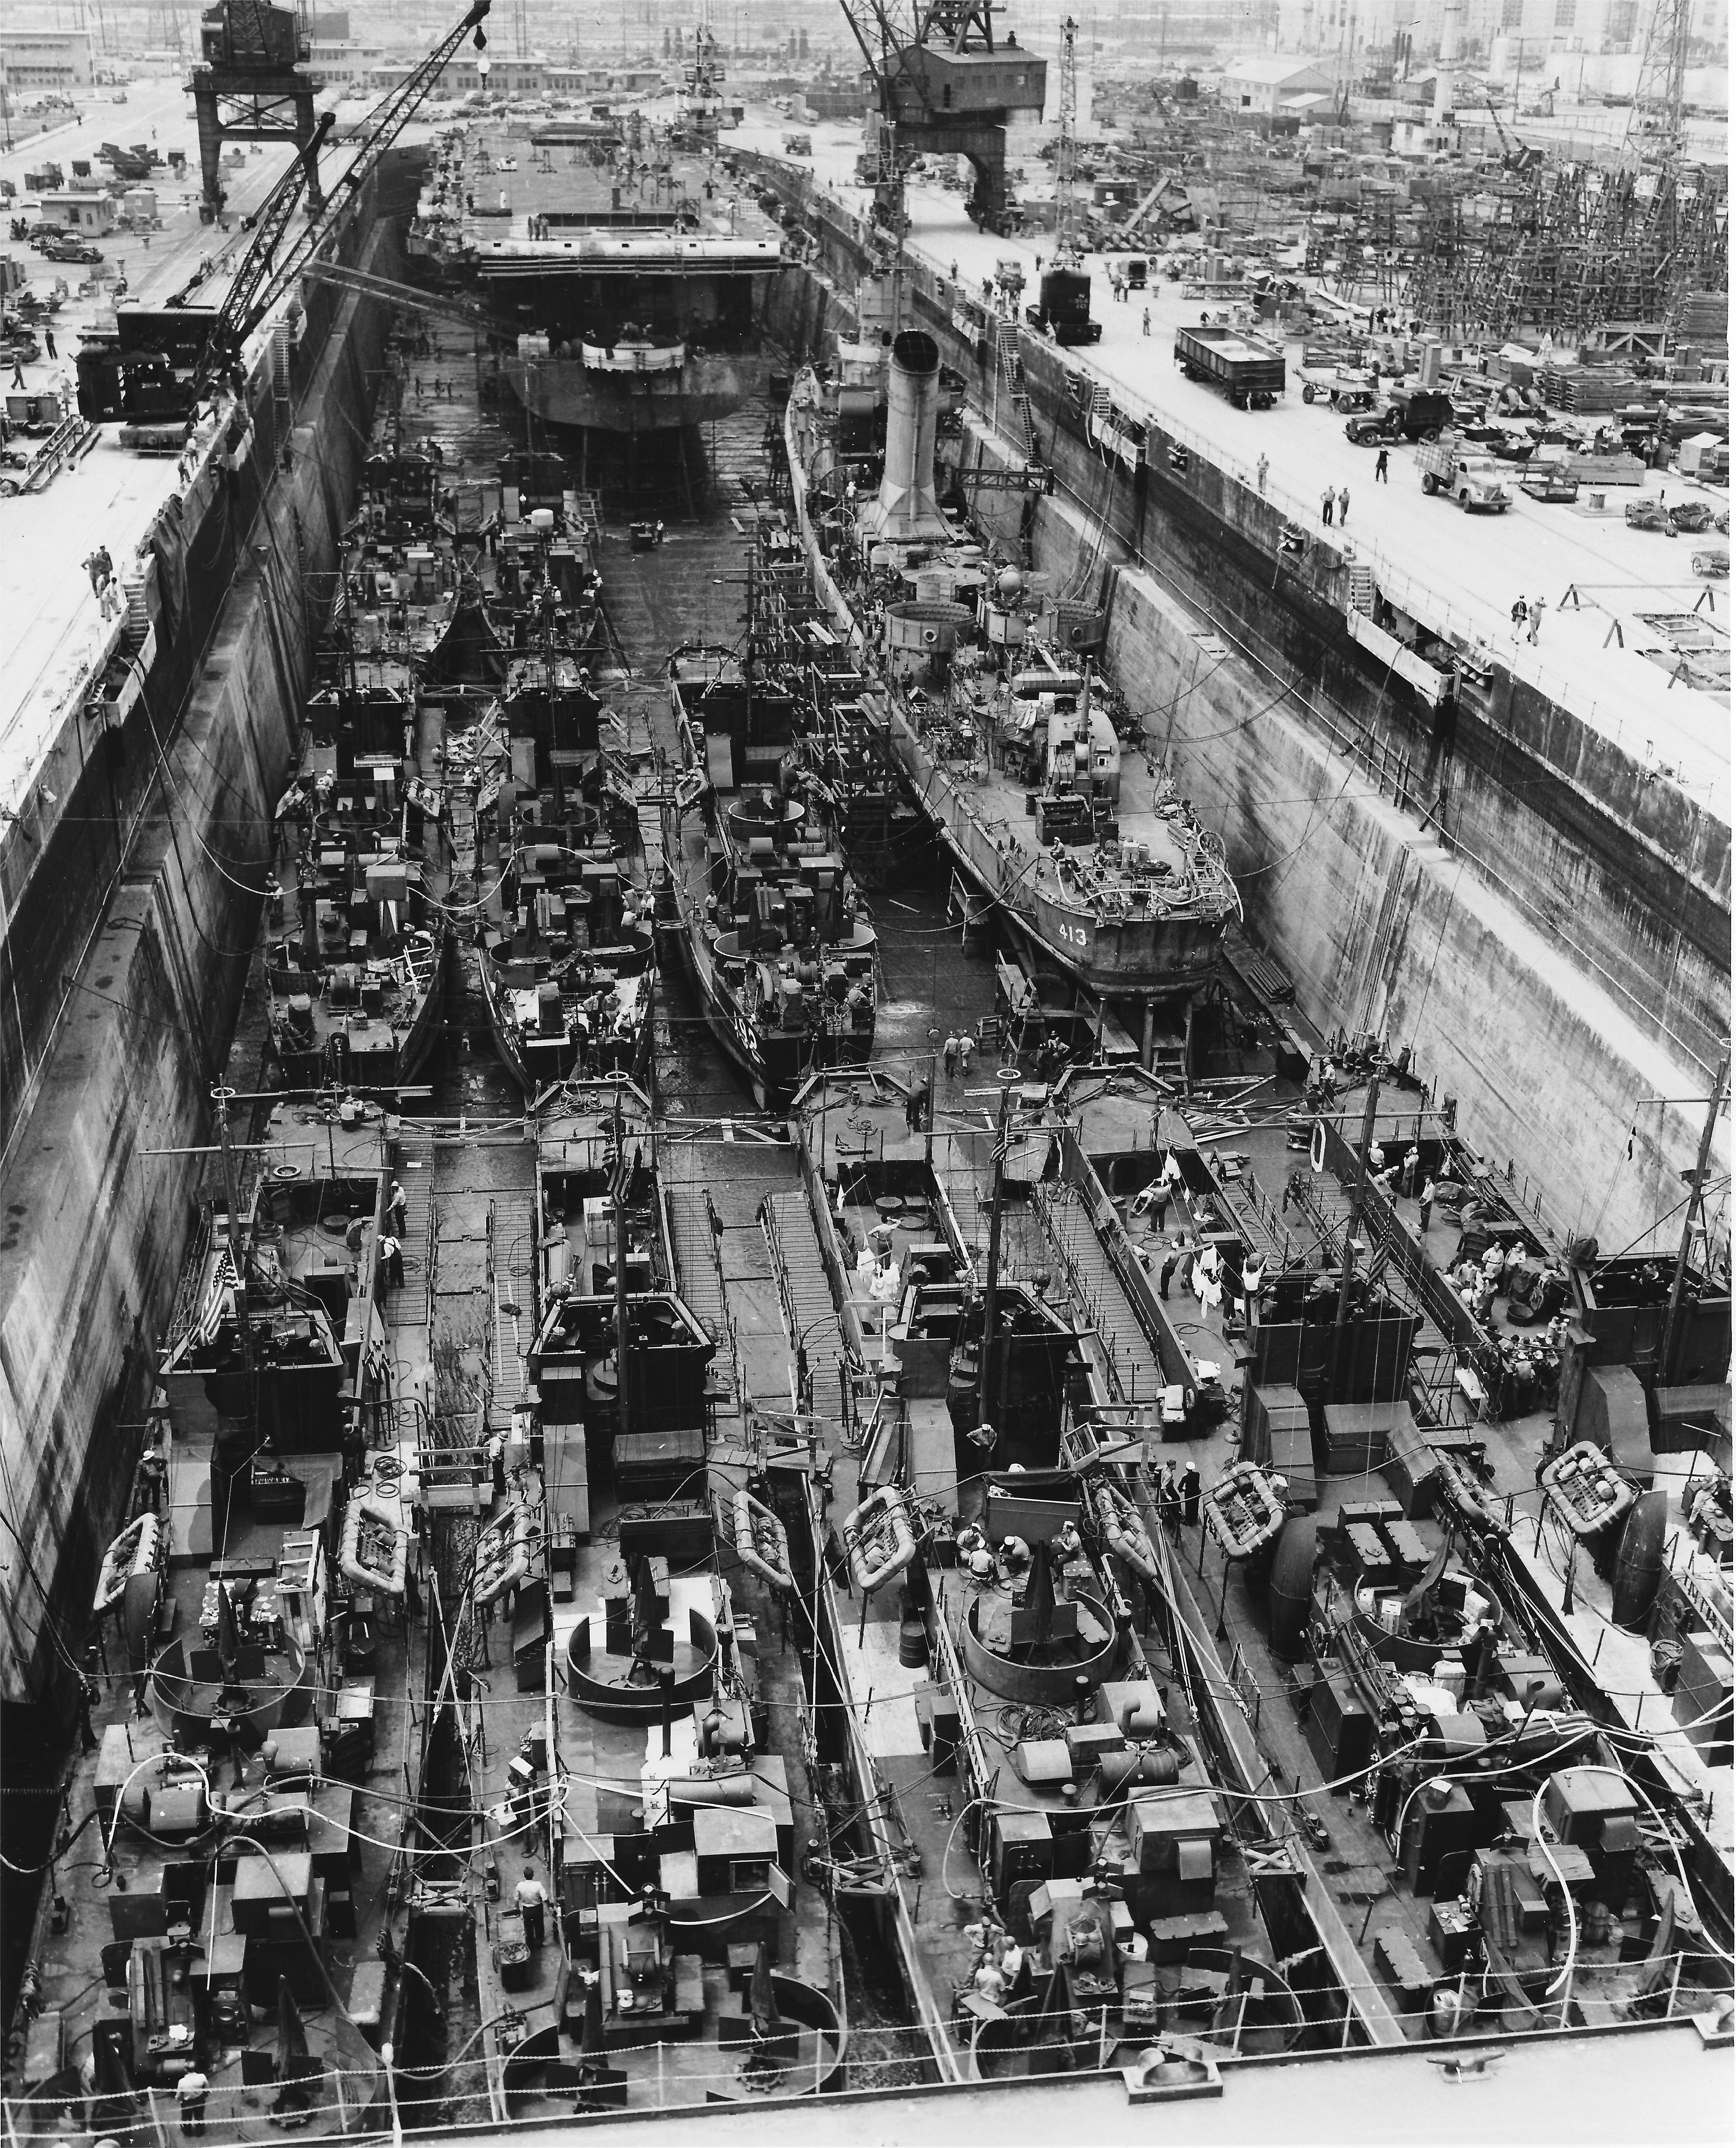 Drydock No. 1 at San Pedro, California, United States, one of the largest drydocks on the west coast, full of ships for upkeep, repair, and conversion, about 14 Jun 1945.